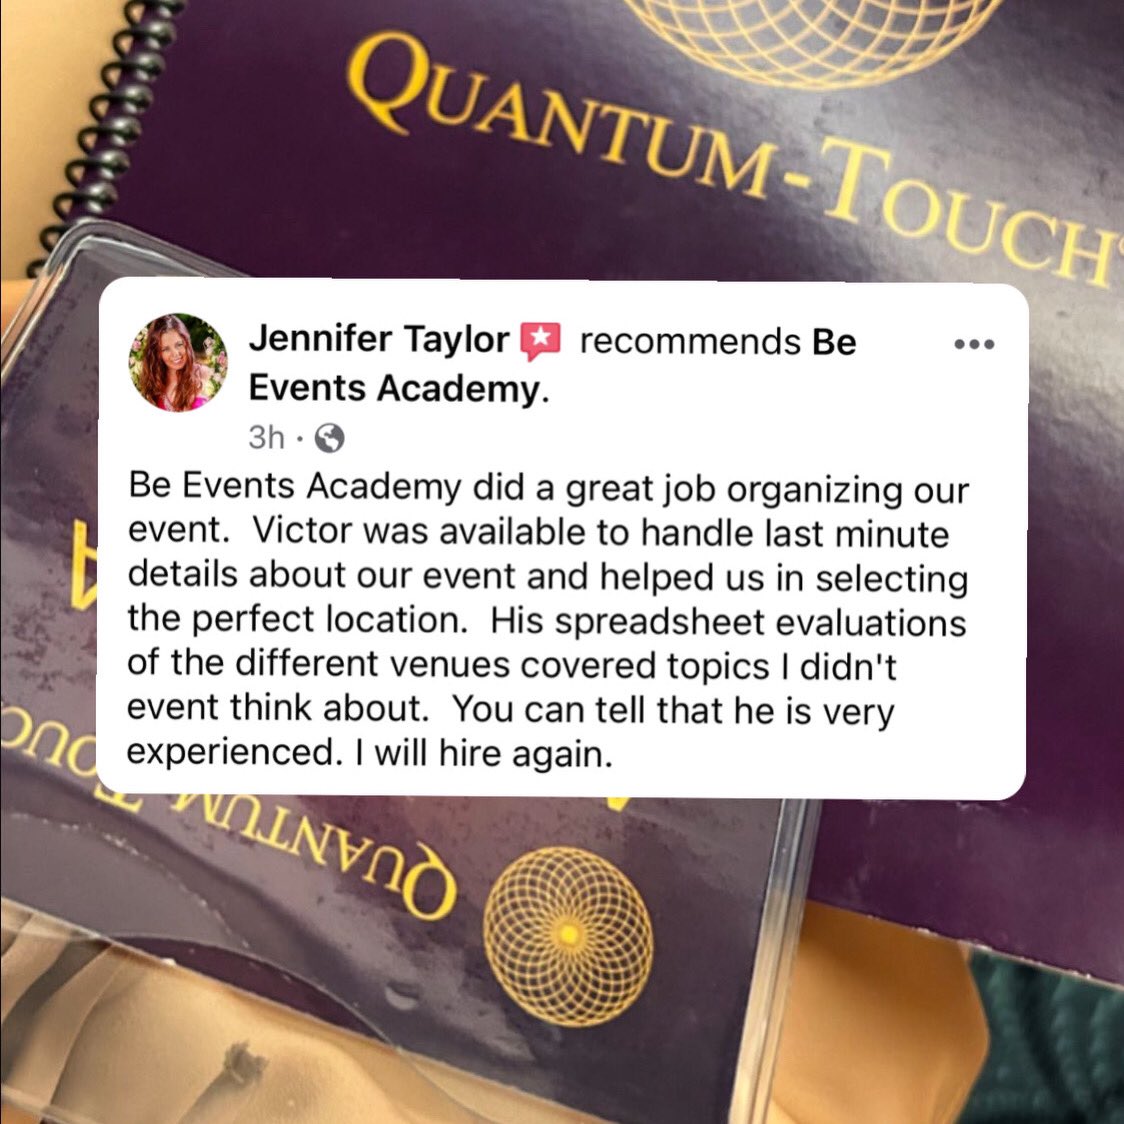 It’s always great to see such positive reviews from clients. Thank you Jennifer from Quantum-Touch for trusting Be Events Academy for your event needs! 💯 #cancunmexico🇲🇽 
#internationalevent #eventplanning #review #beeventsacademy